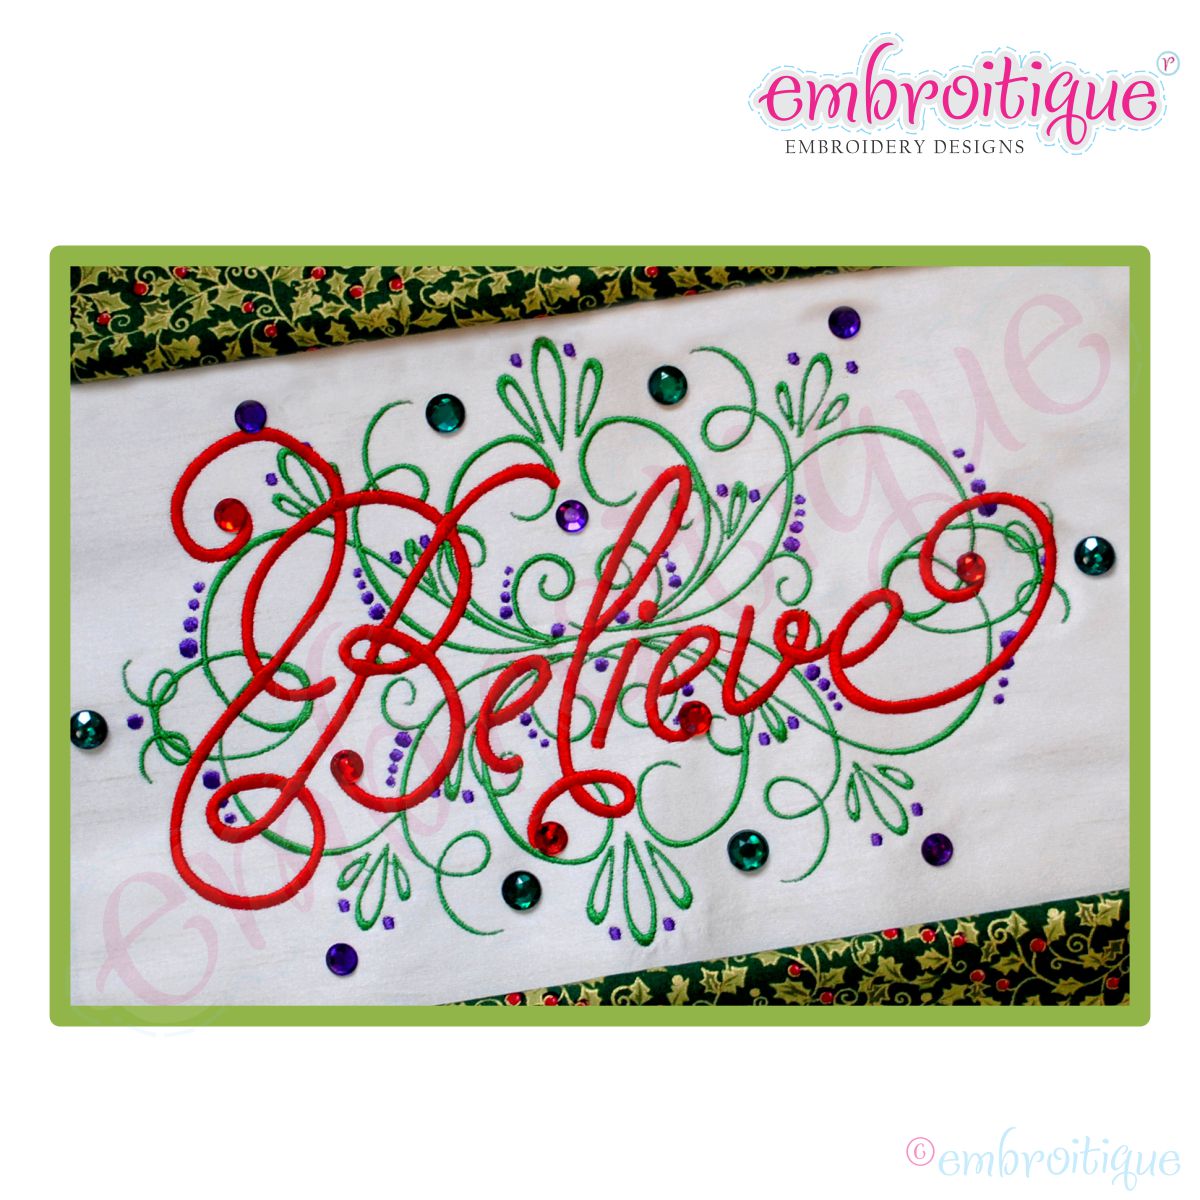 Believe Embroidery Designs